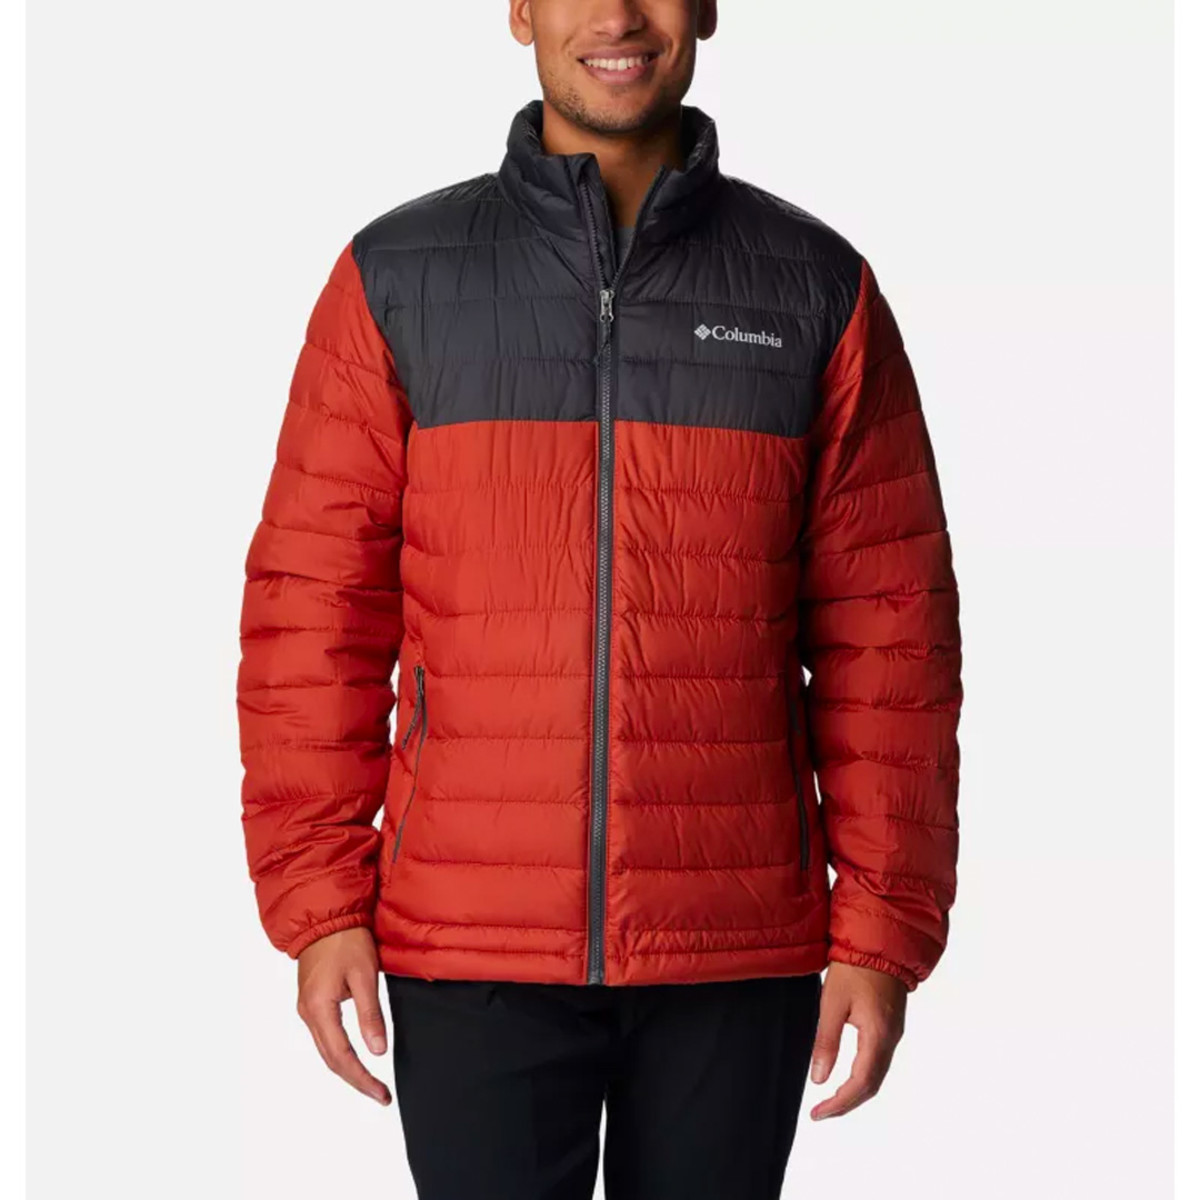 Columbia Holiday Deals: Save up to 50% on jackets, shoes, and more ...